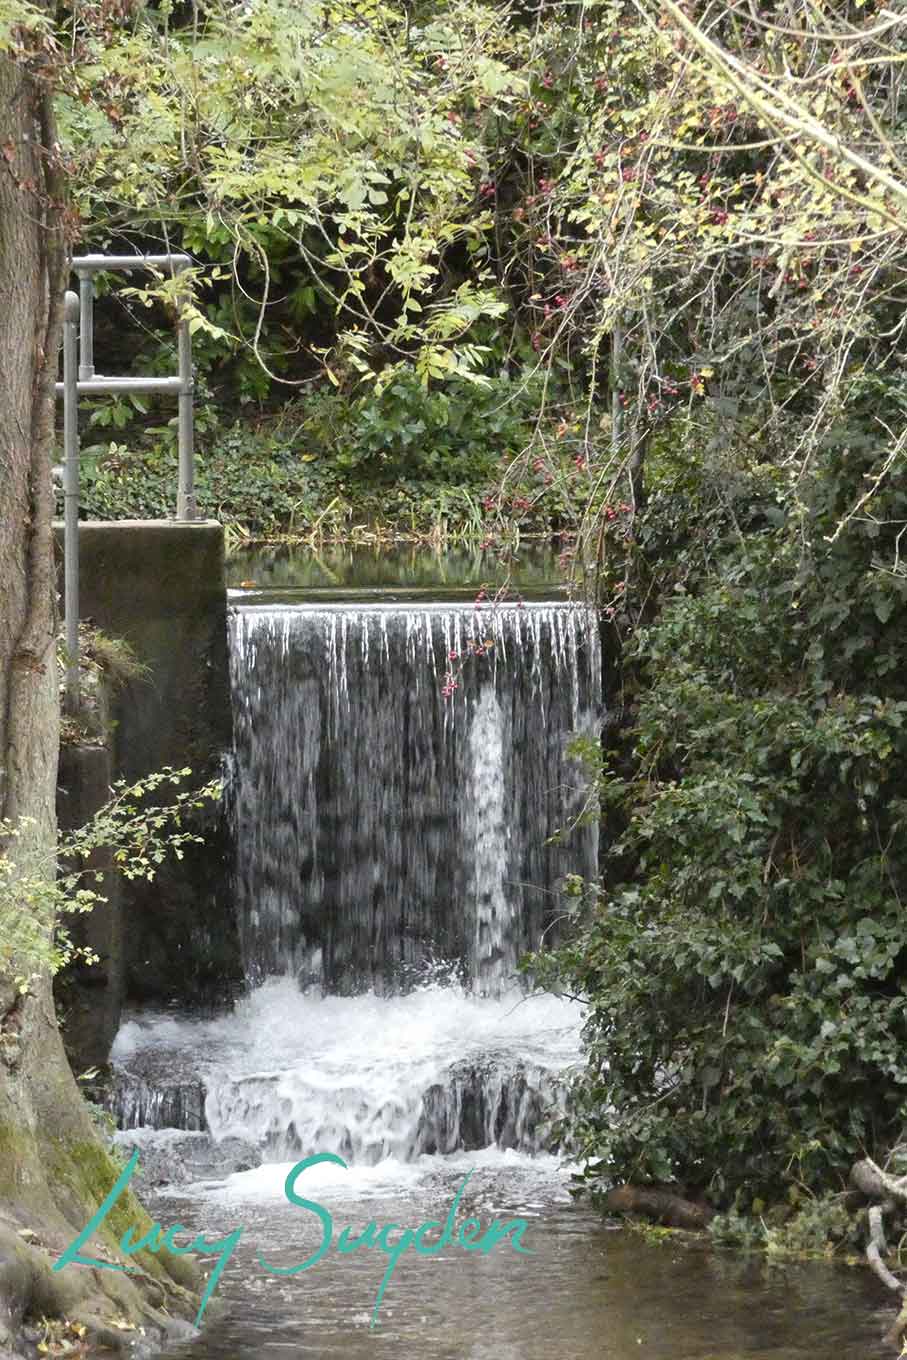 Waterfalls in Oughtonhead Common Nature Reserve